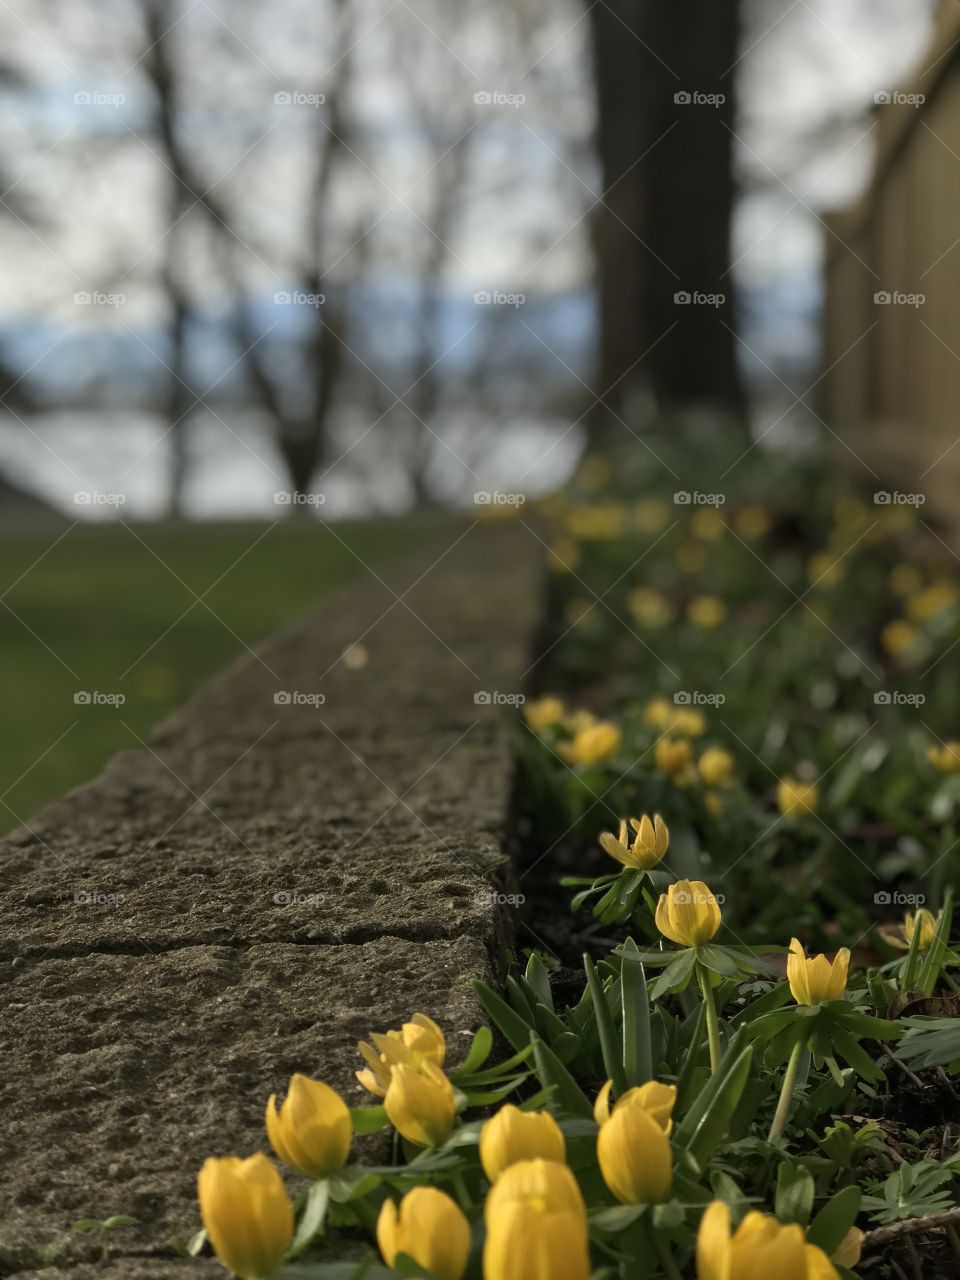 Little yellow aconite blossoming in a raised garden bed at a favourite garden park. A view of the mountains can be seen in the background through the still bare trees. Will be visiting tomorrow again to get my Spring On with more flower shots!